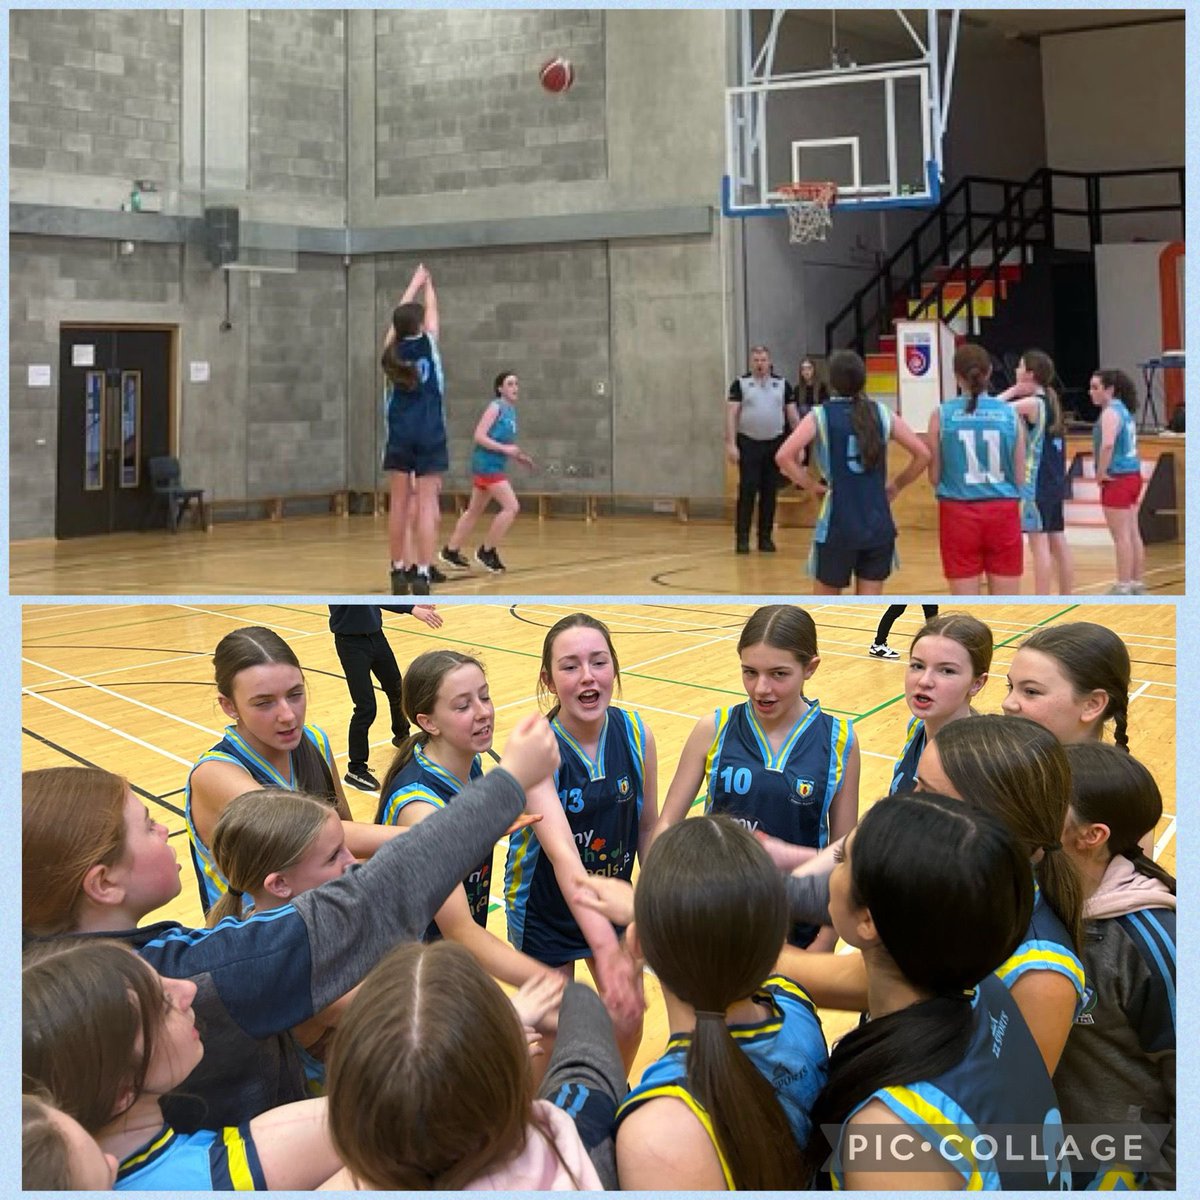 Well Done and Best Wishes to our 2nd year girls Basketball team who have reached the NE Semi Final against Colaiste Clavin this Friday⛹️‍♀️🏀